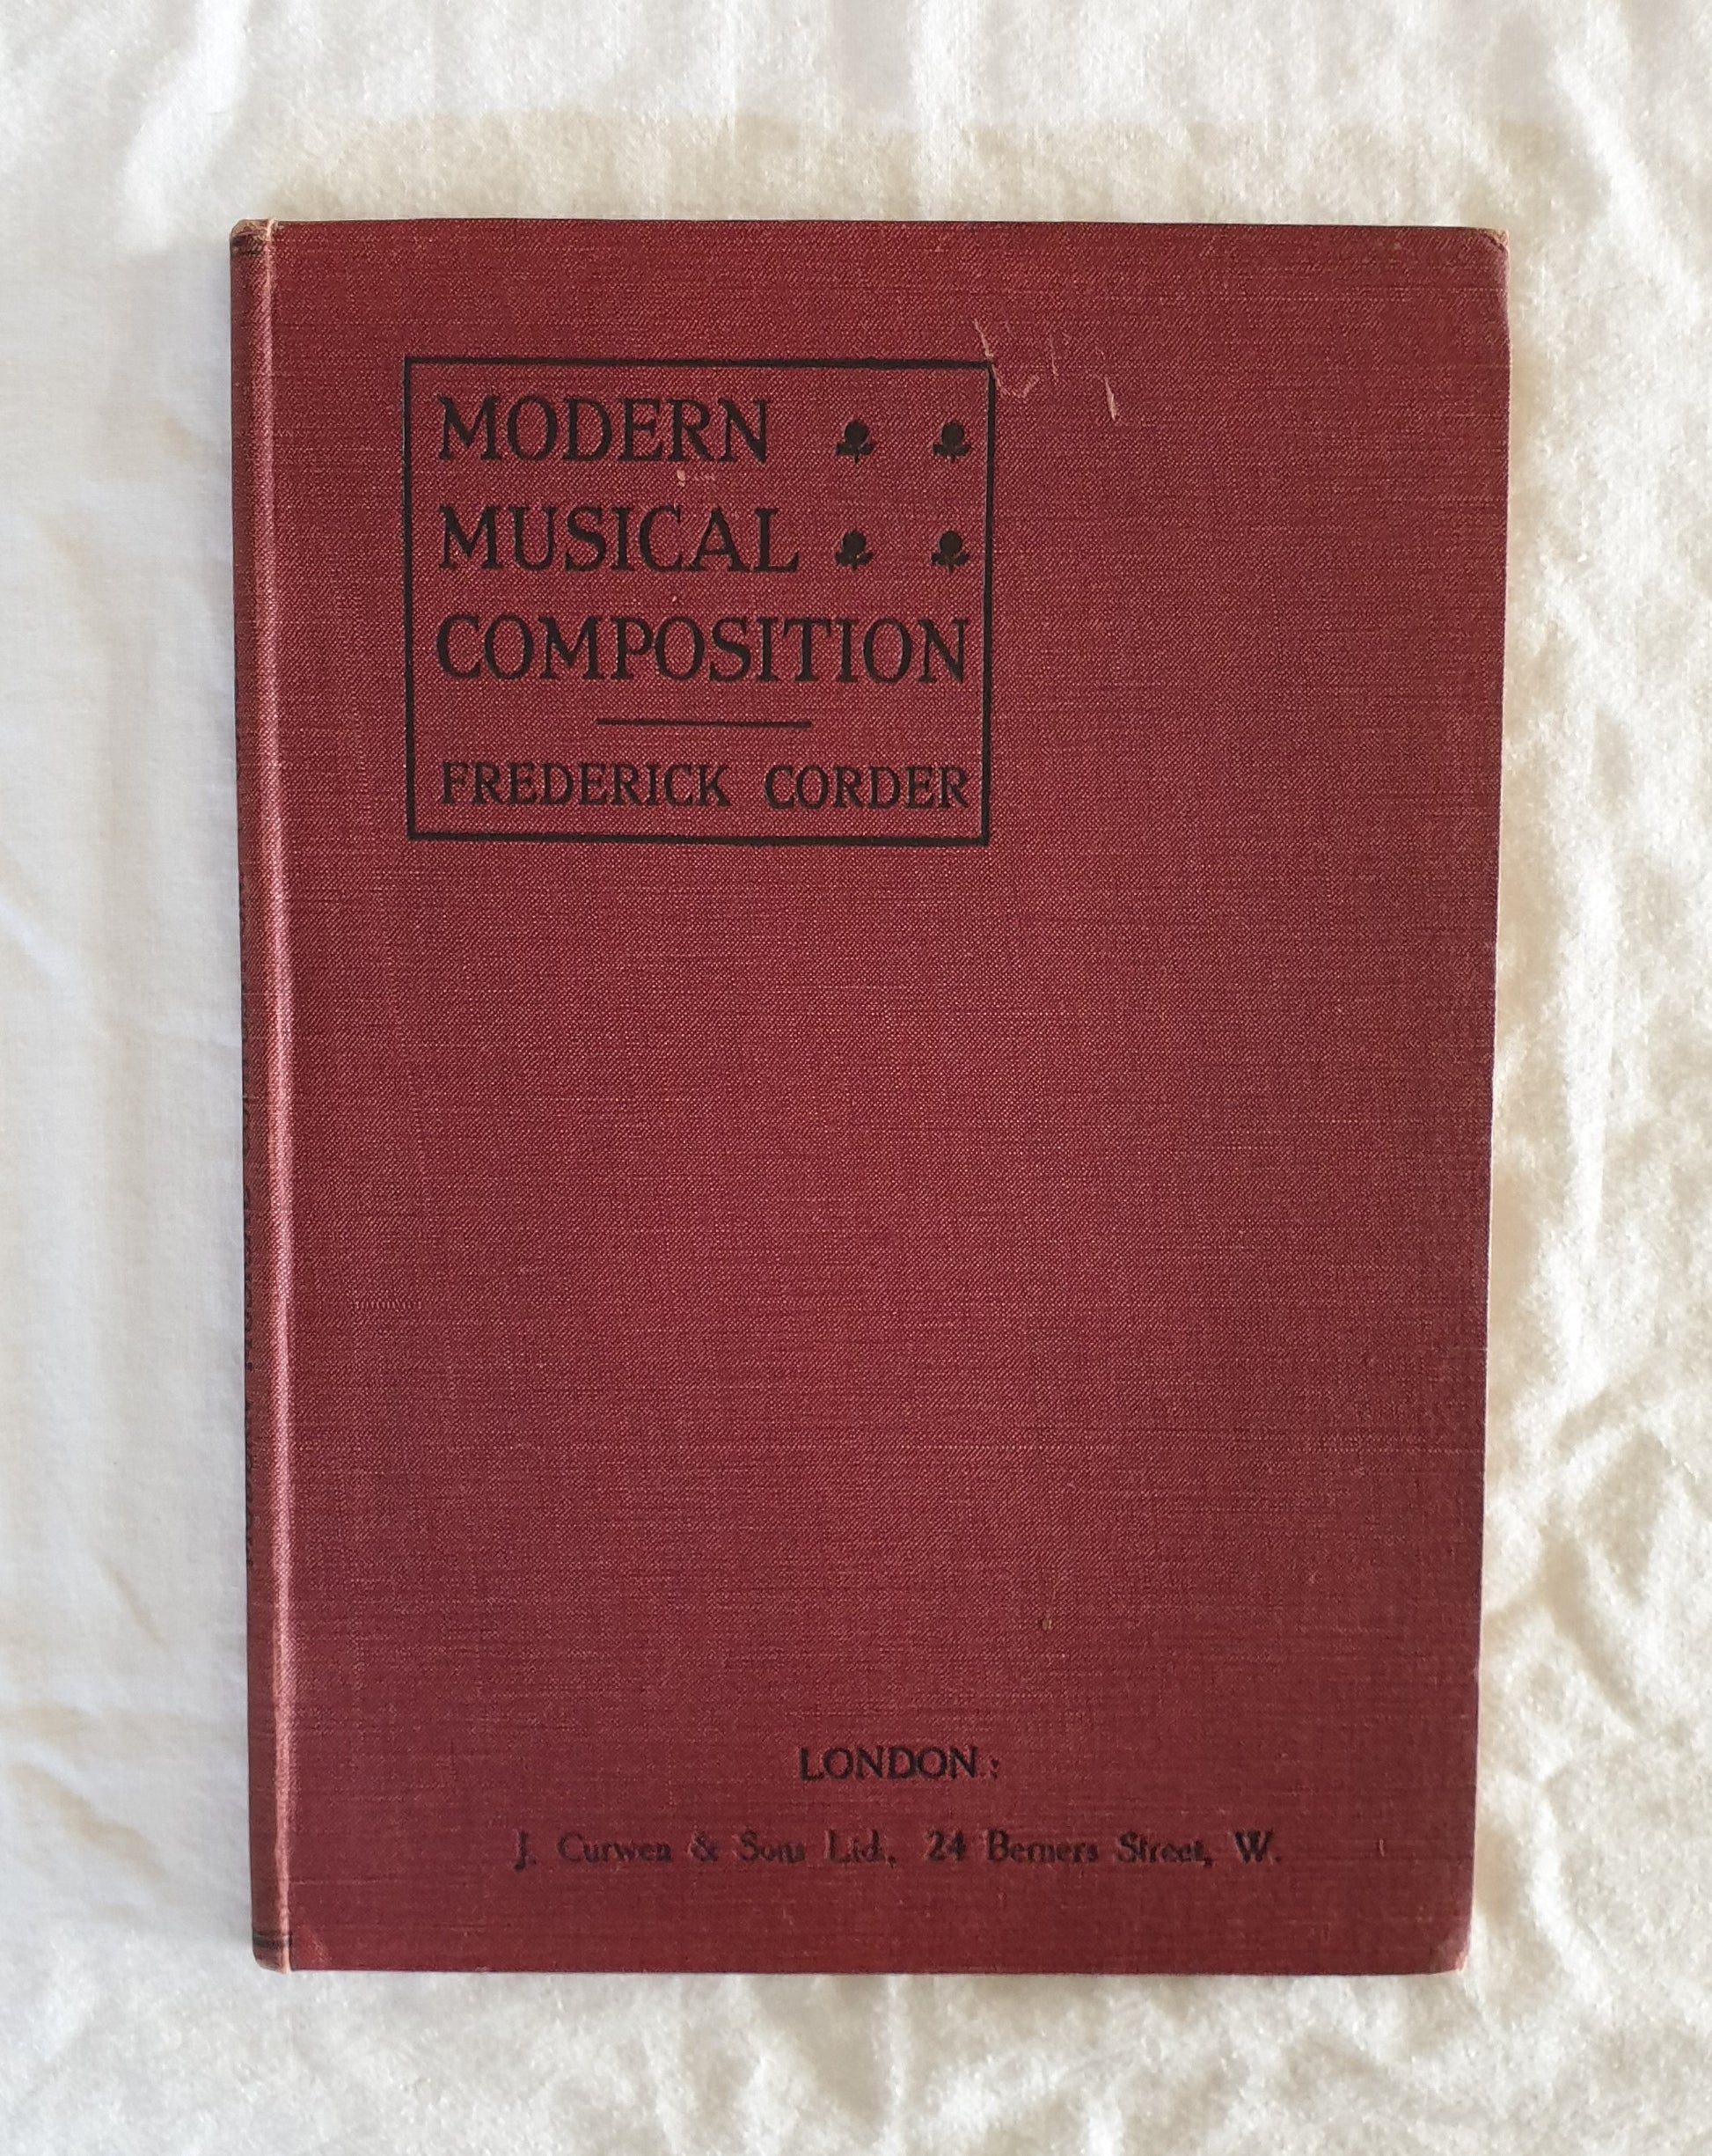 Modern Musical Composition by Frederick Corder